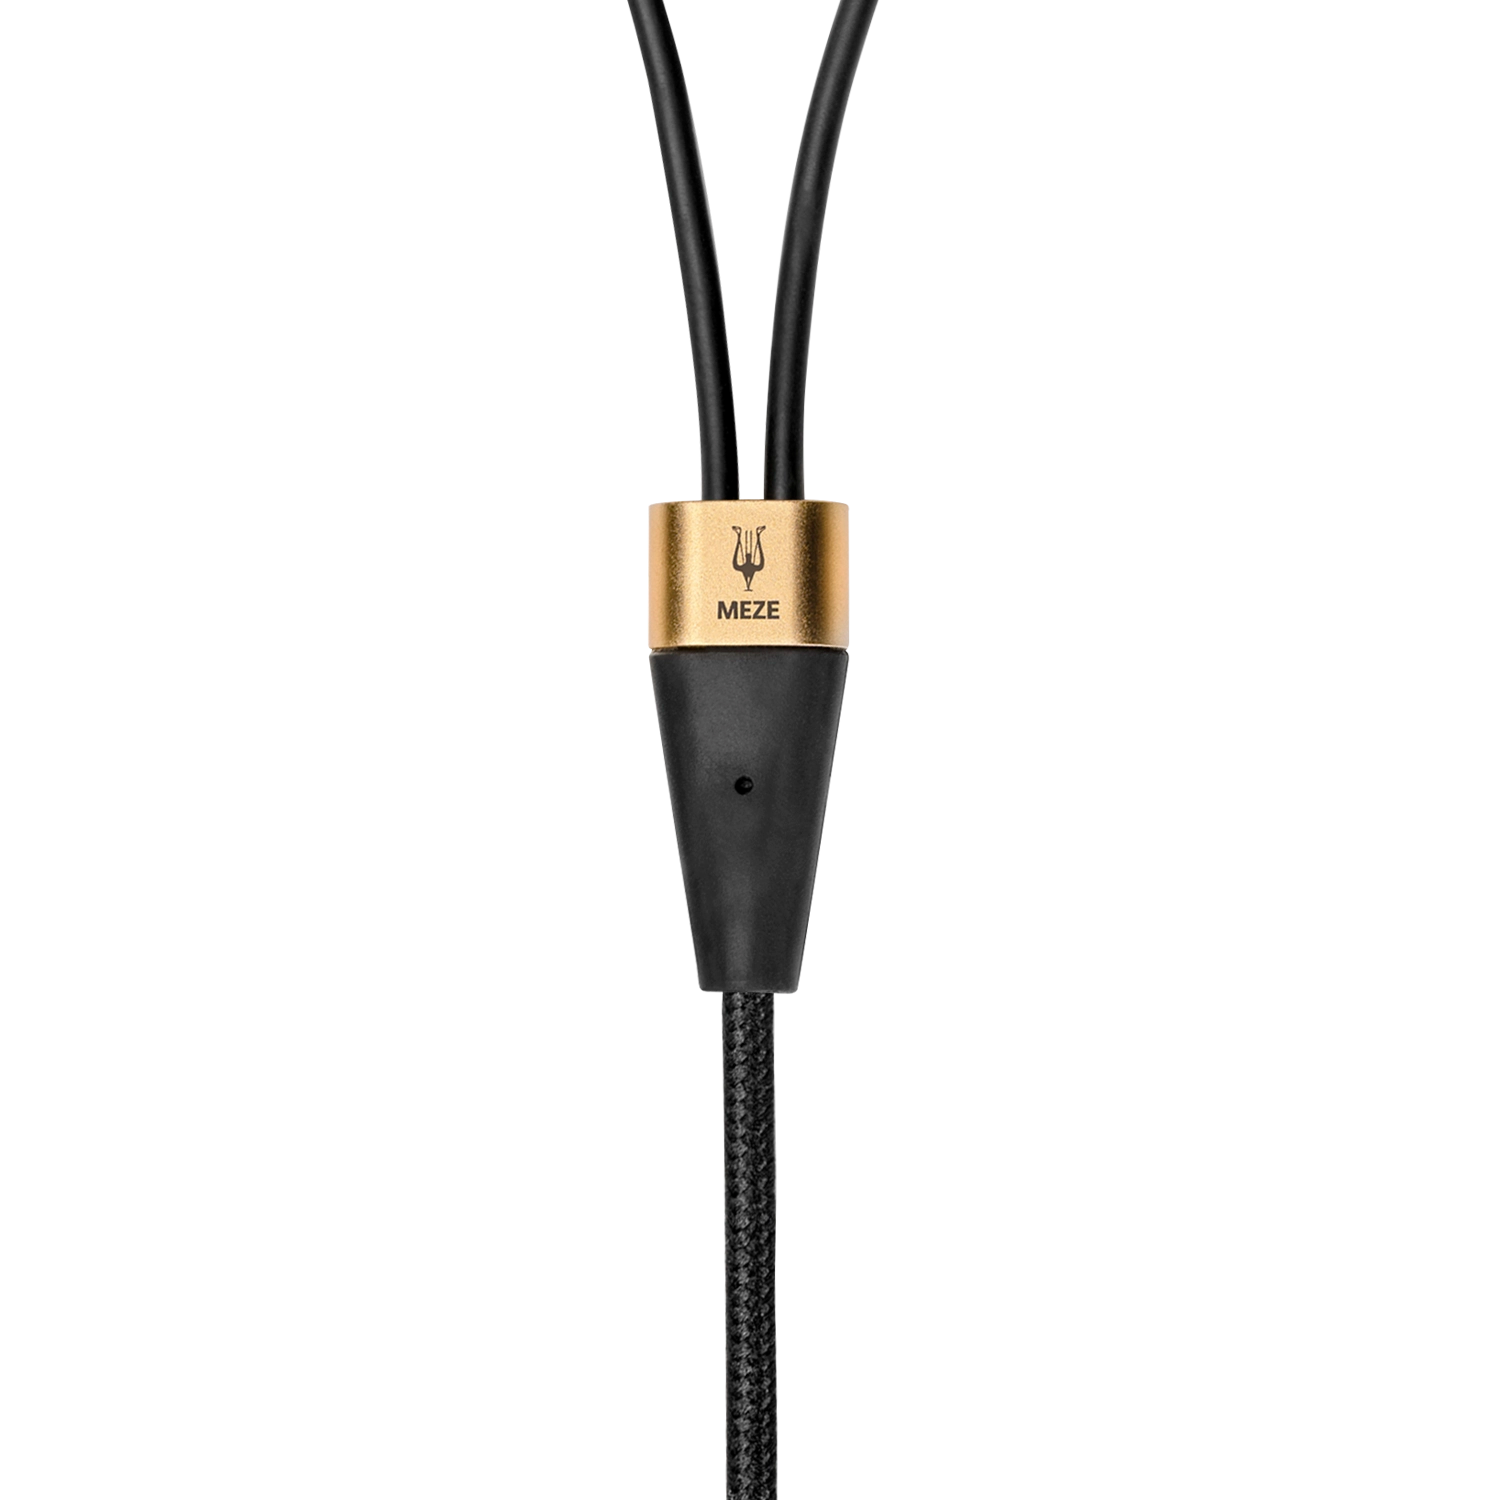 MONO 3.5 MM 99 SERIES GOLD STANDARD CABLE